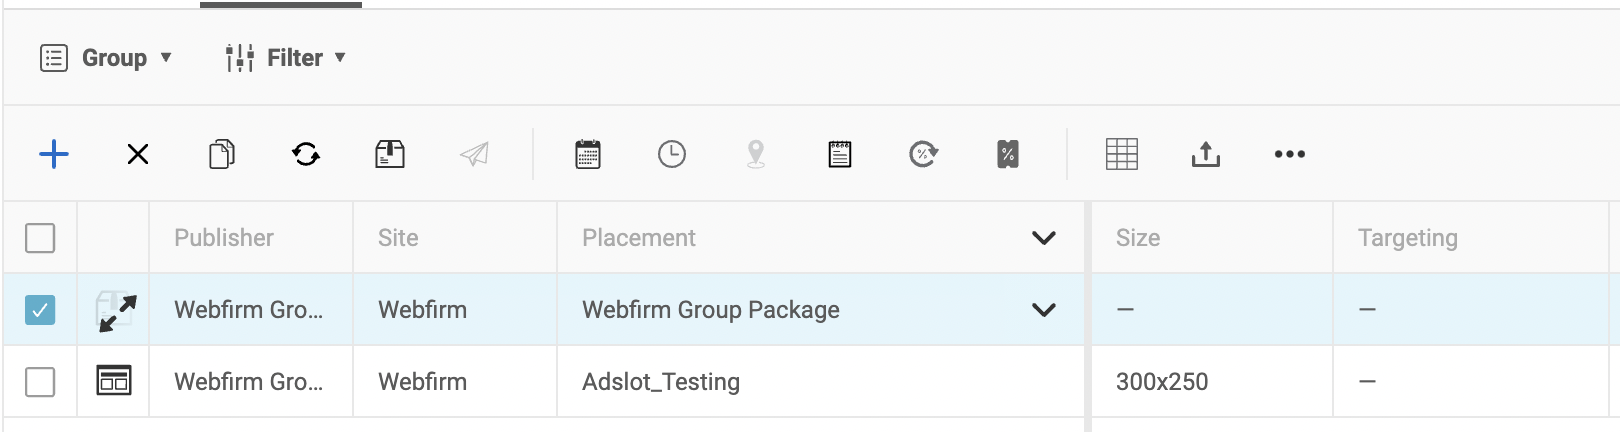 Webfirm_Group_Package_-_Packaged.png